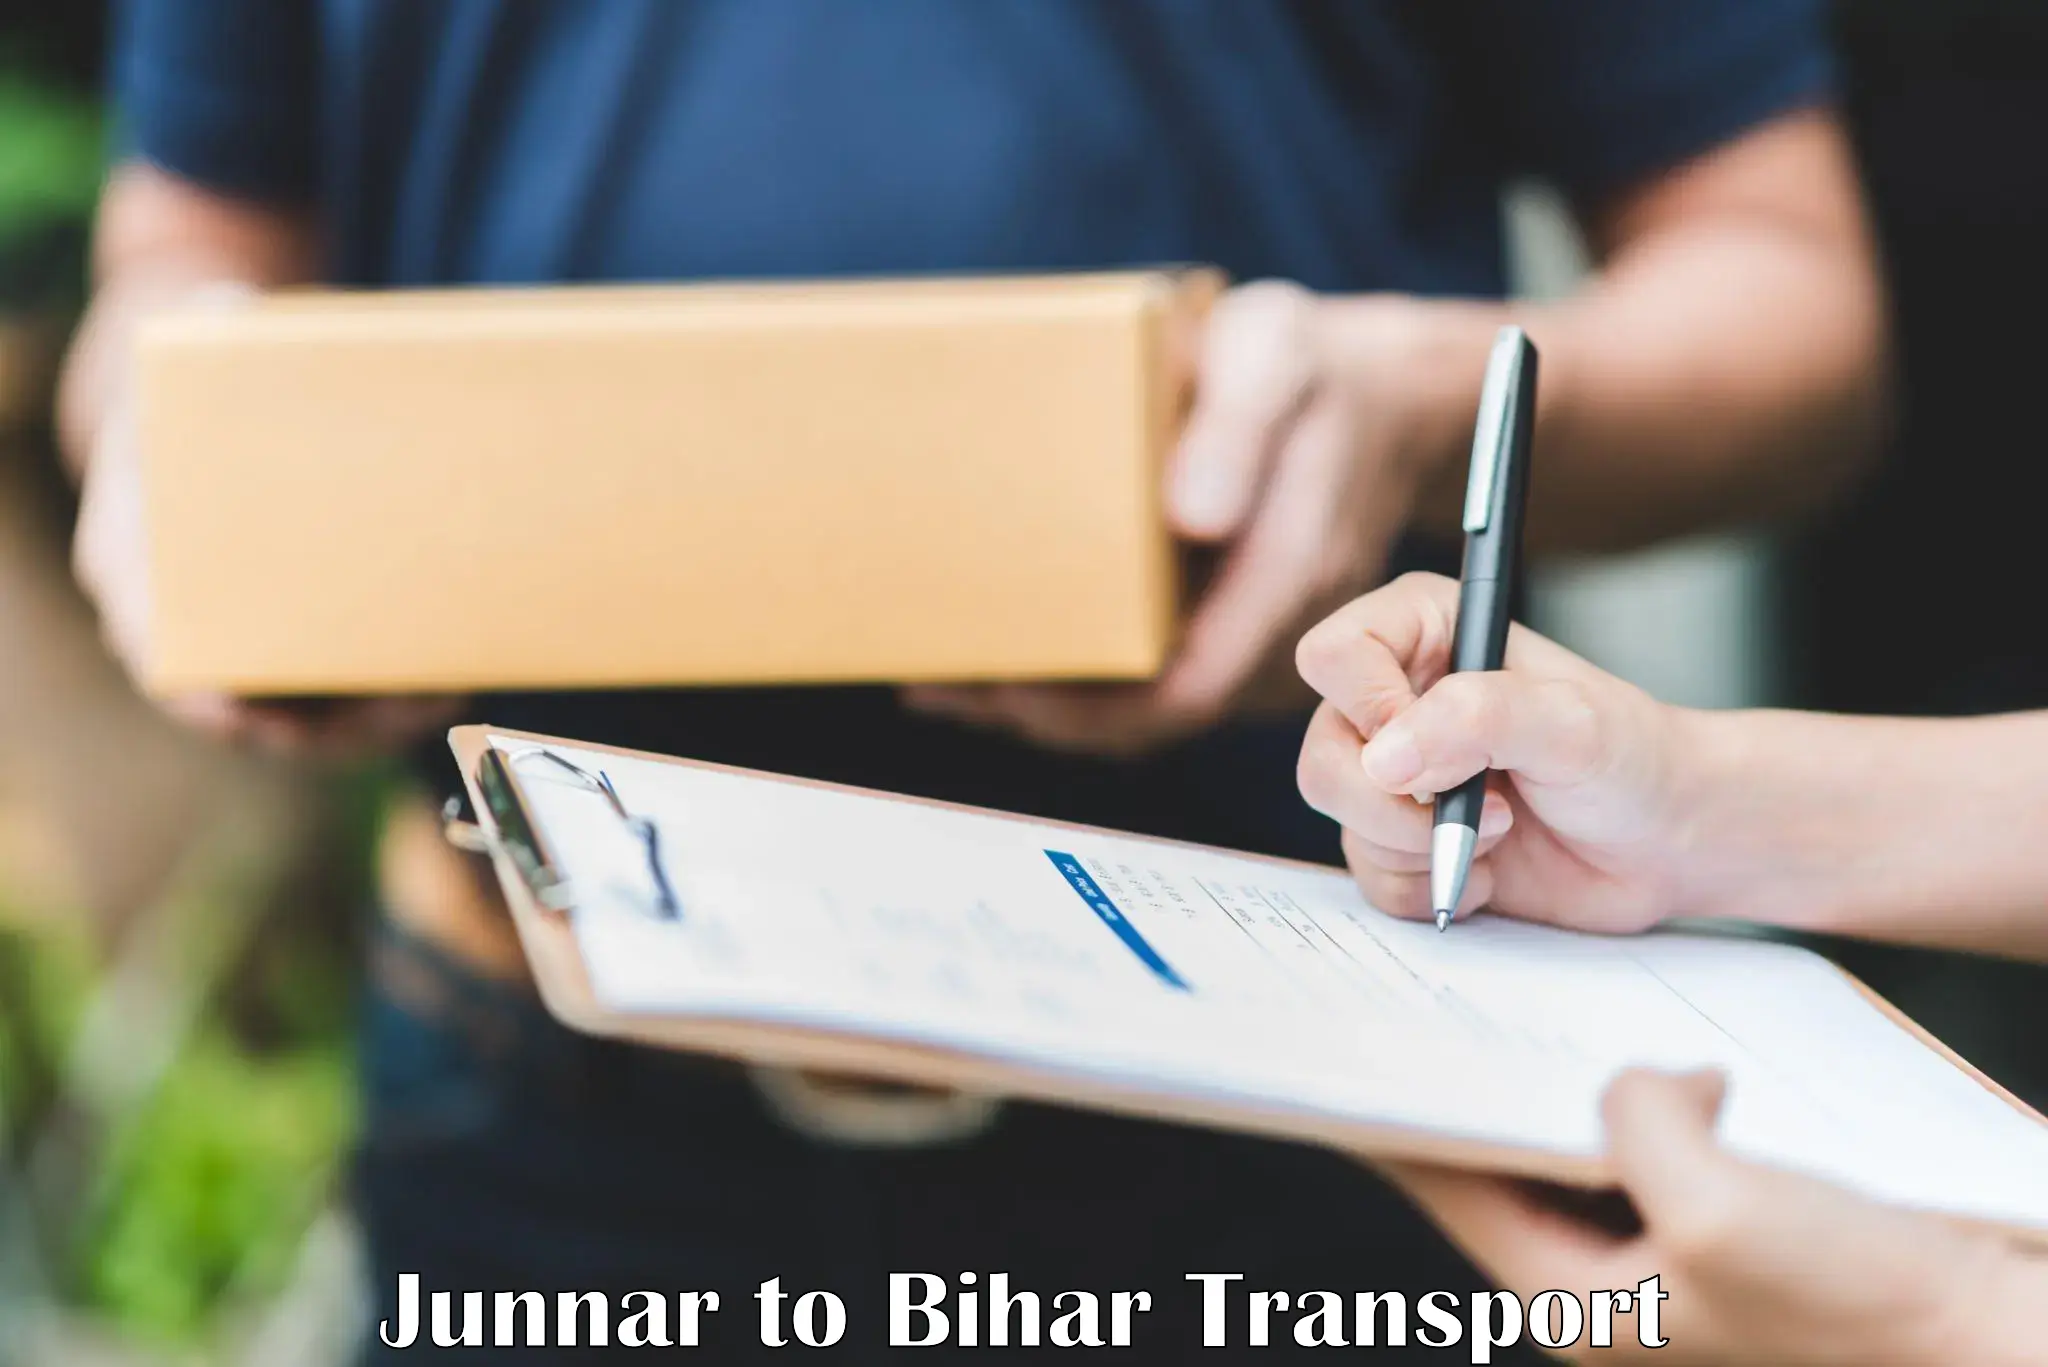 Container transport service Junnar to Maheshkhunt